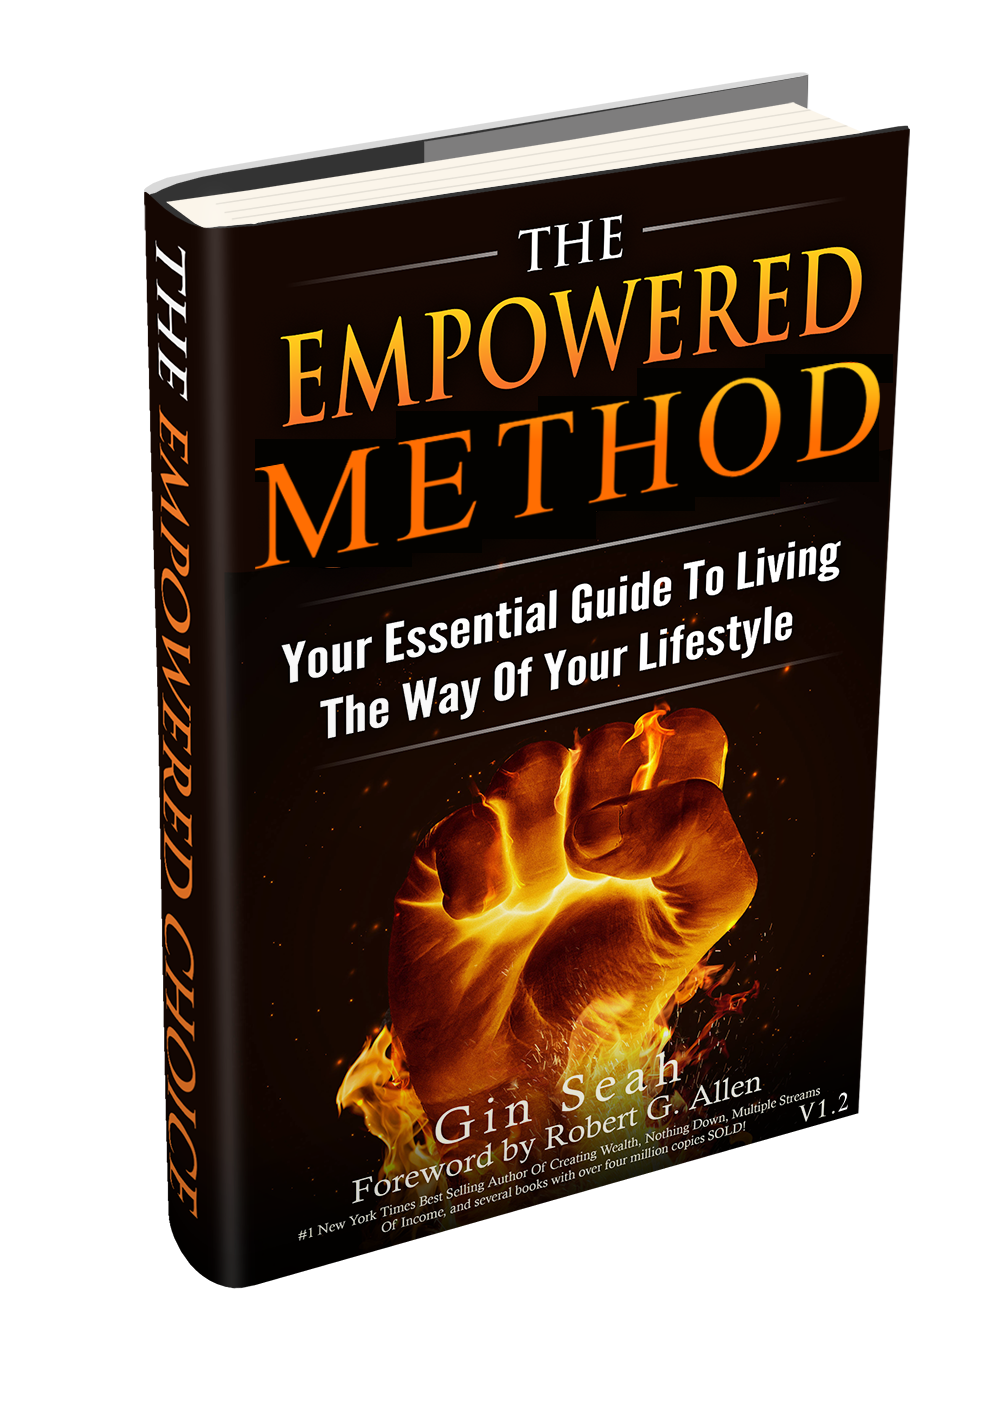 The Empowered Method